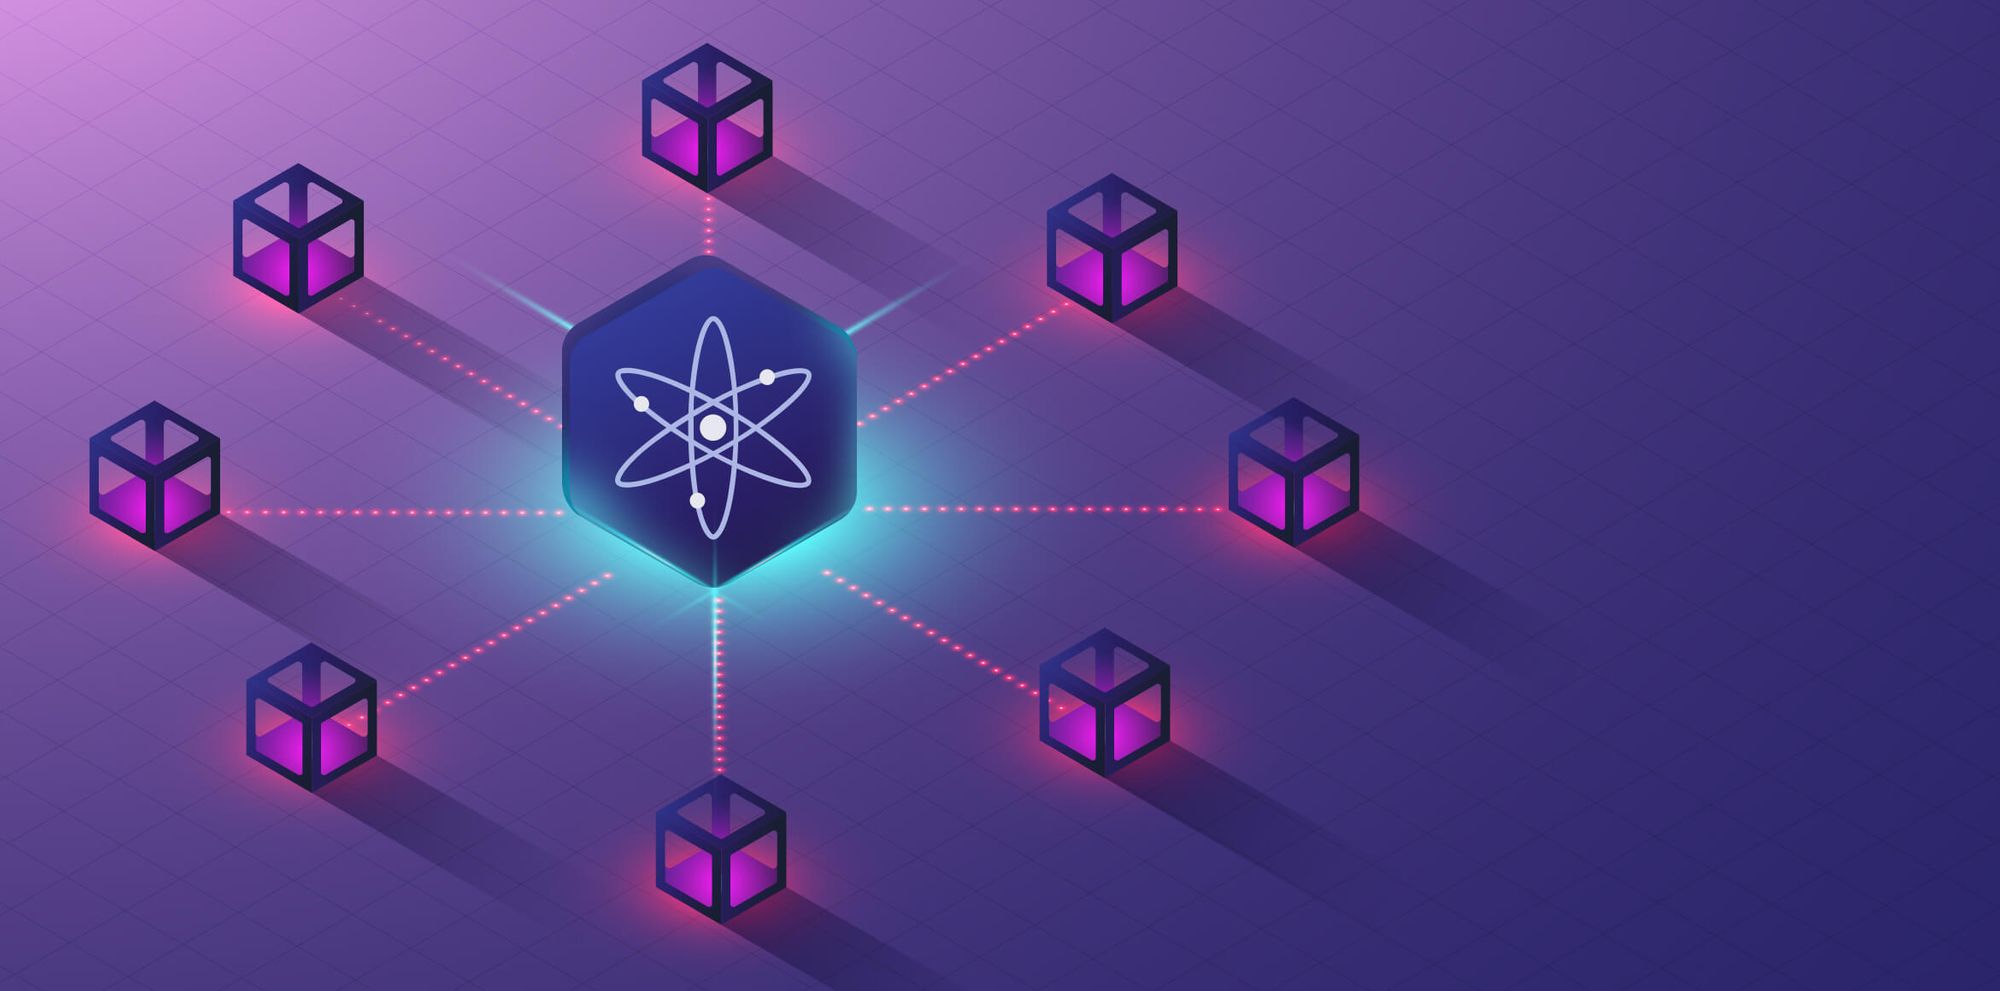 What is Cosmos ATOM?